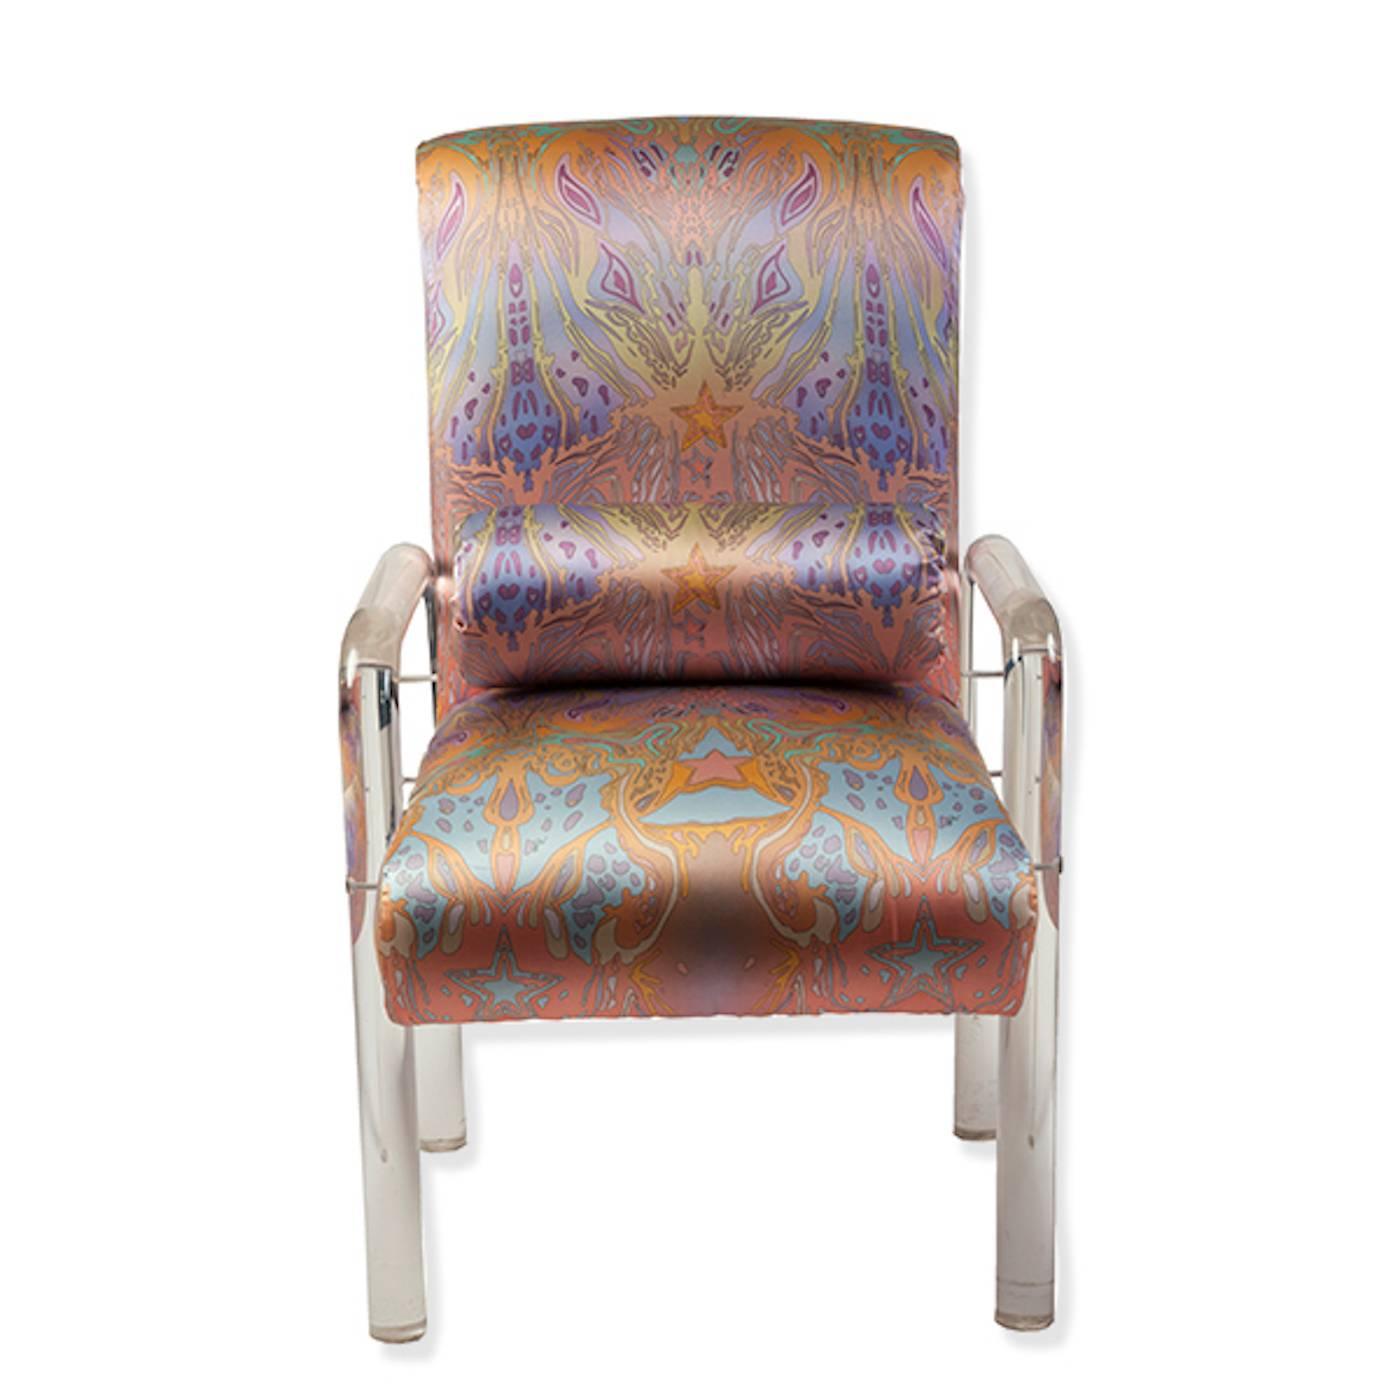 Mid-Century Modern Charles Hollis Jones Lucite Armchairs Upholstered in Silk, Pair For Sale